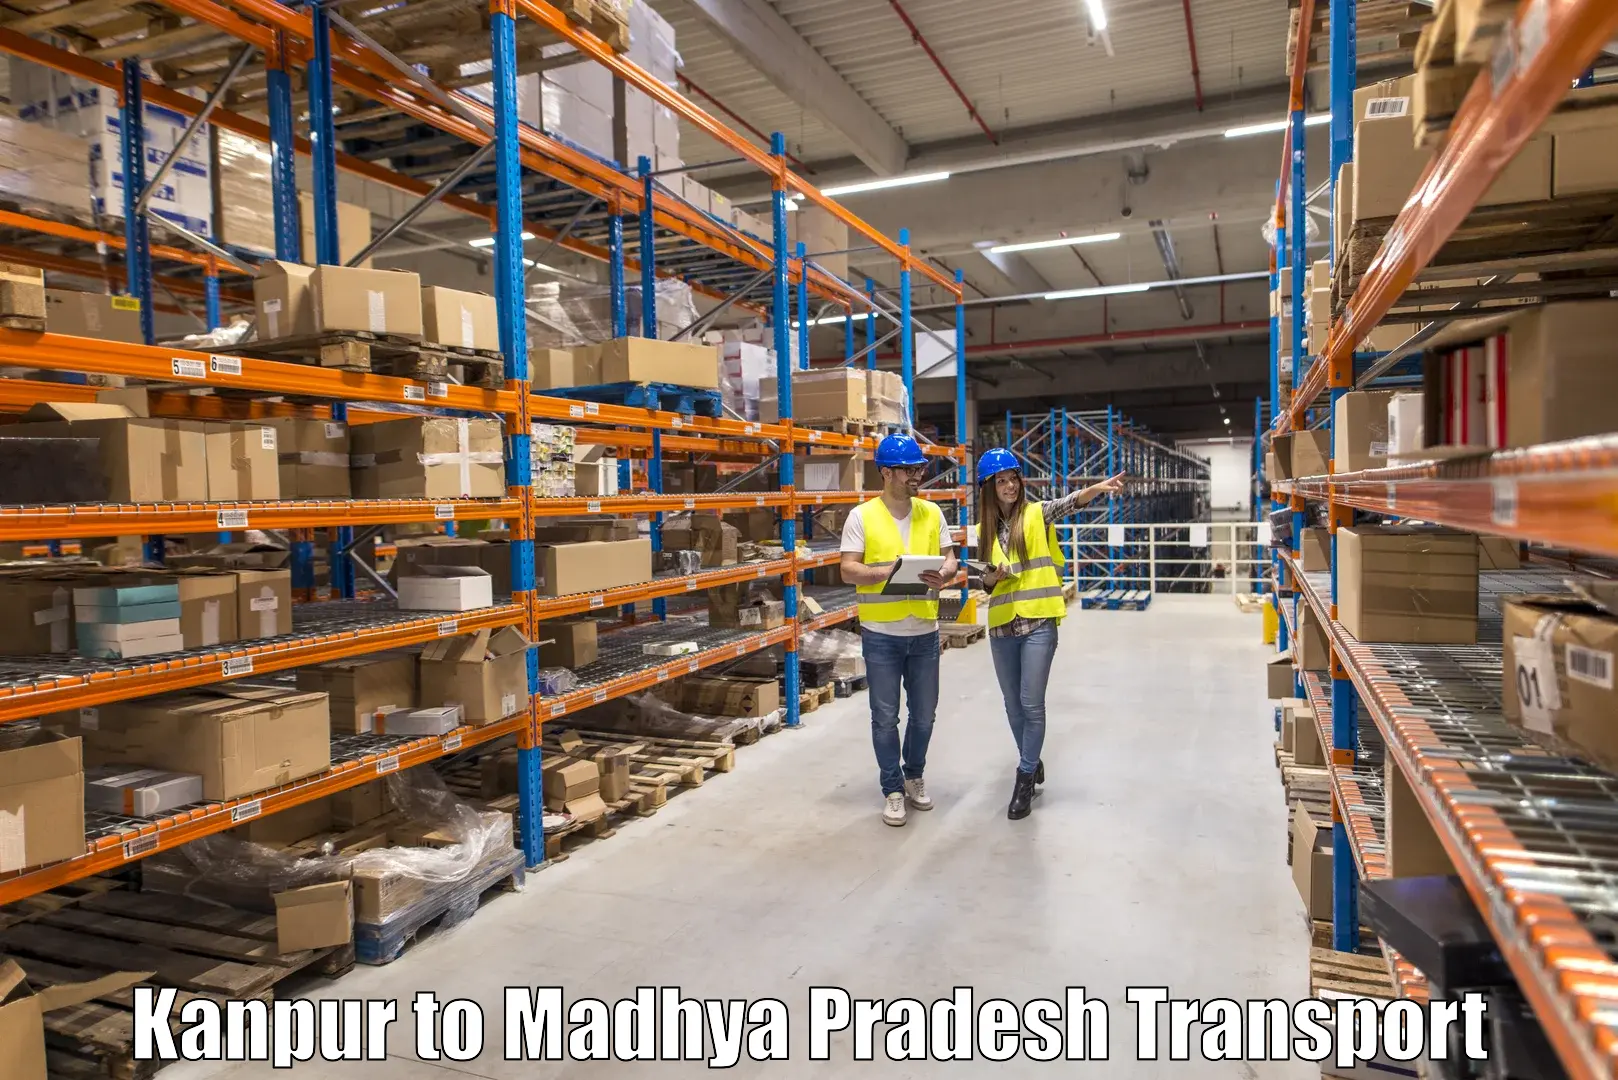 Air freight transport services Kanpur to Manawar